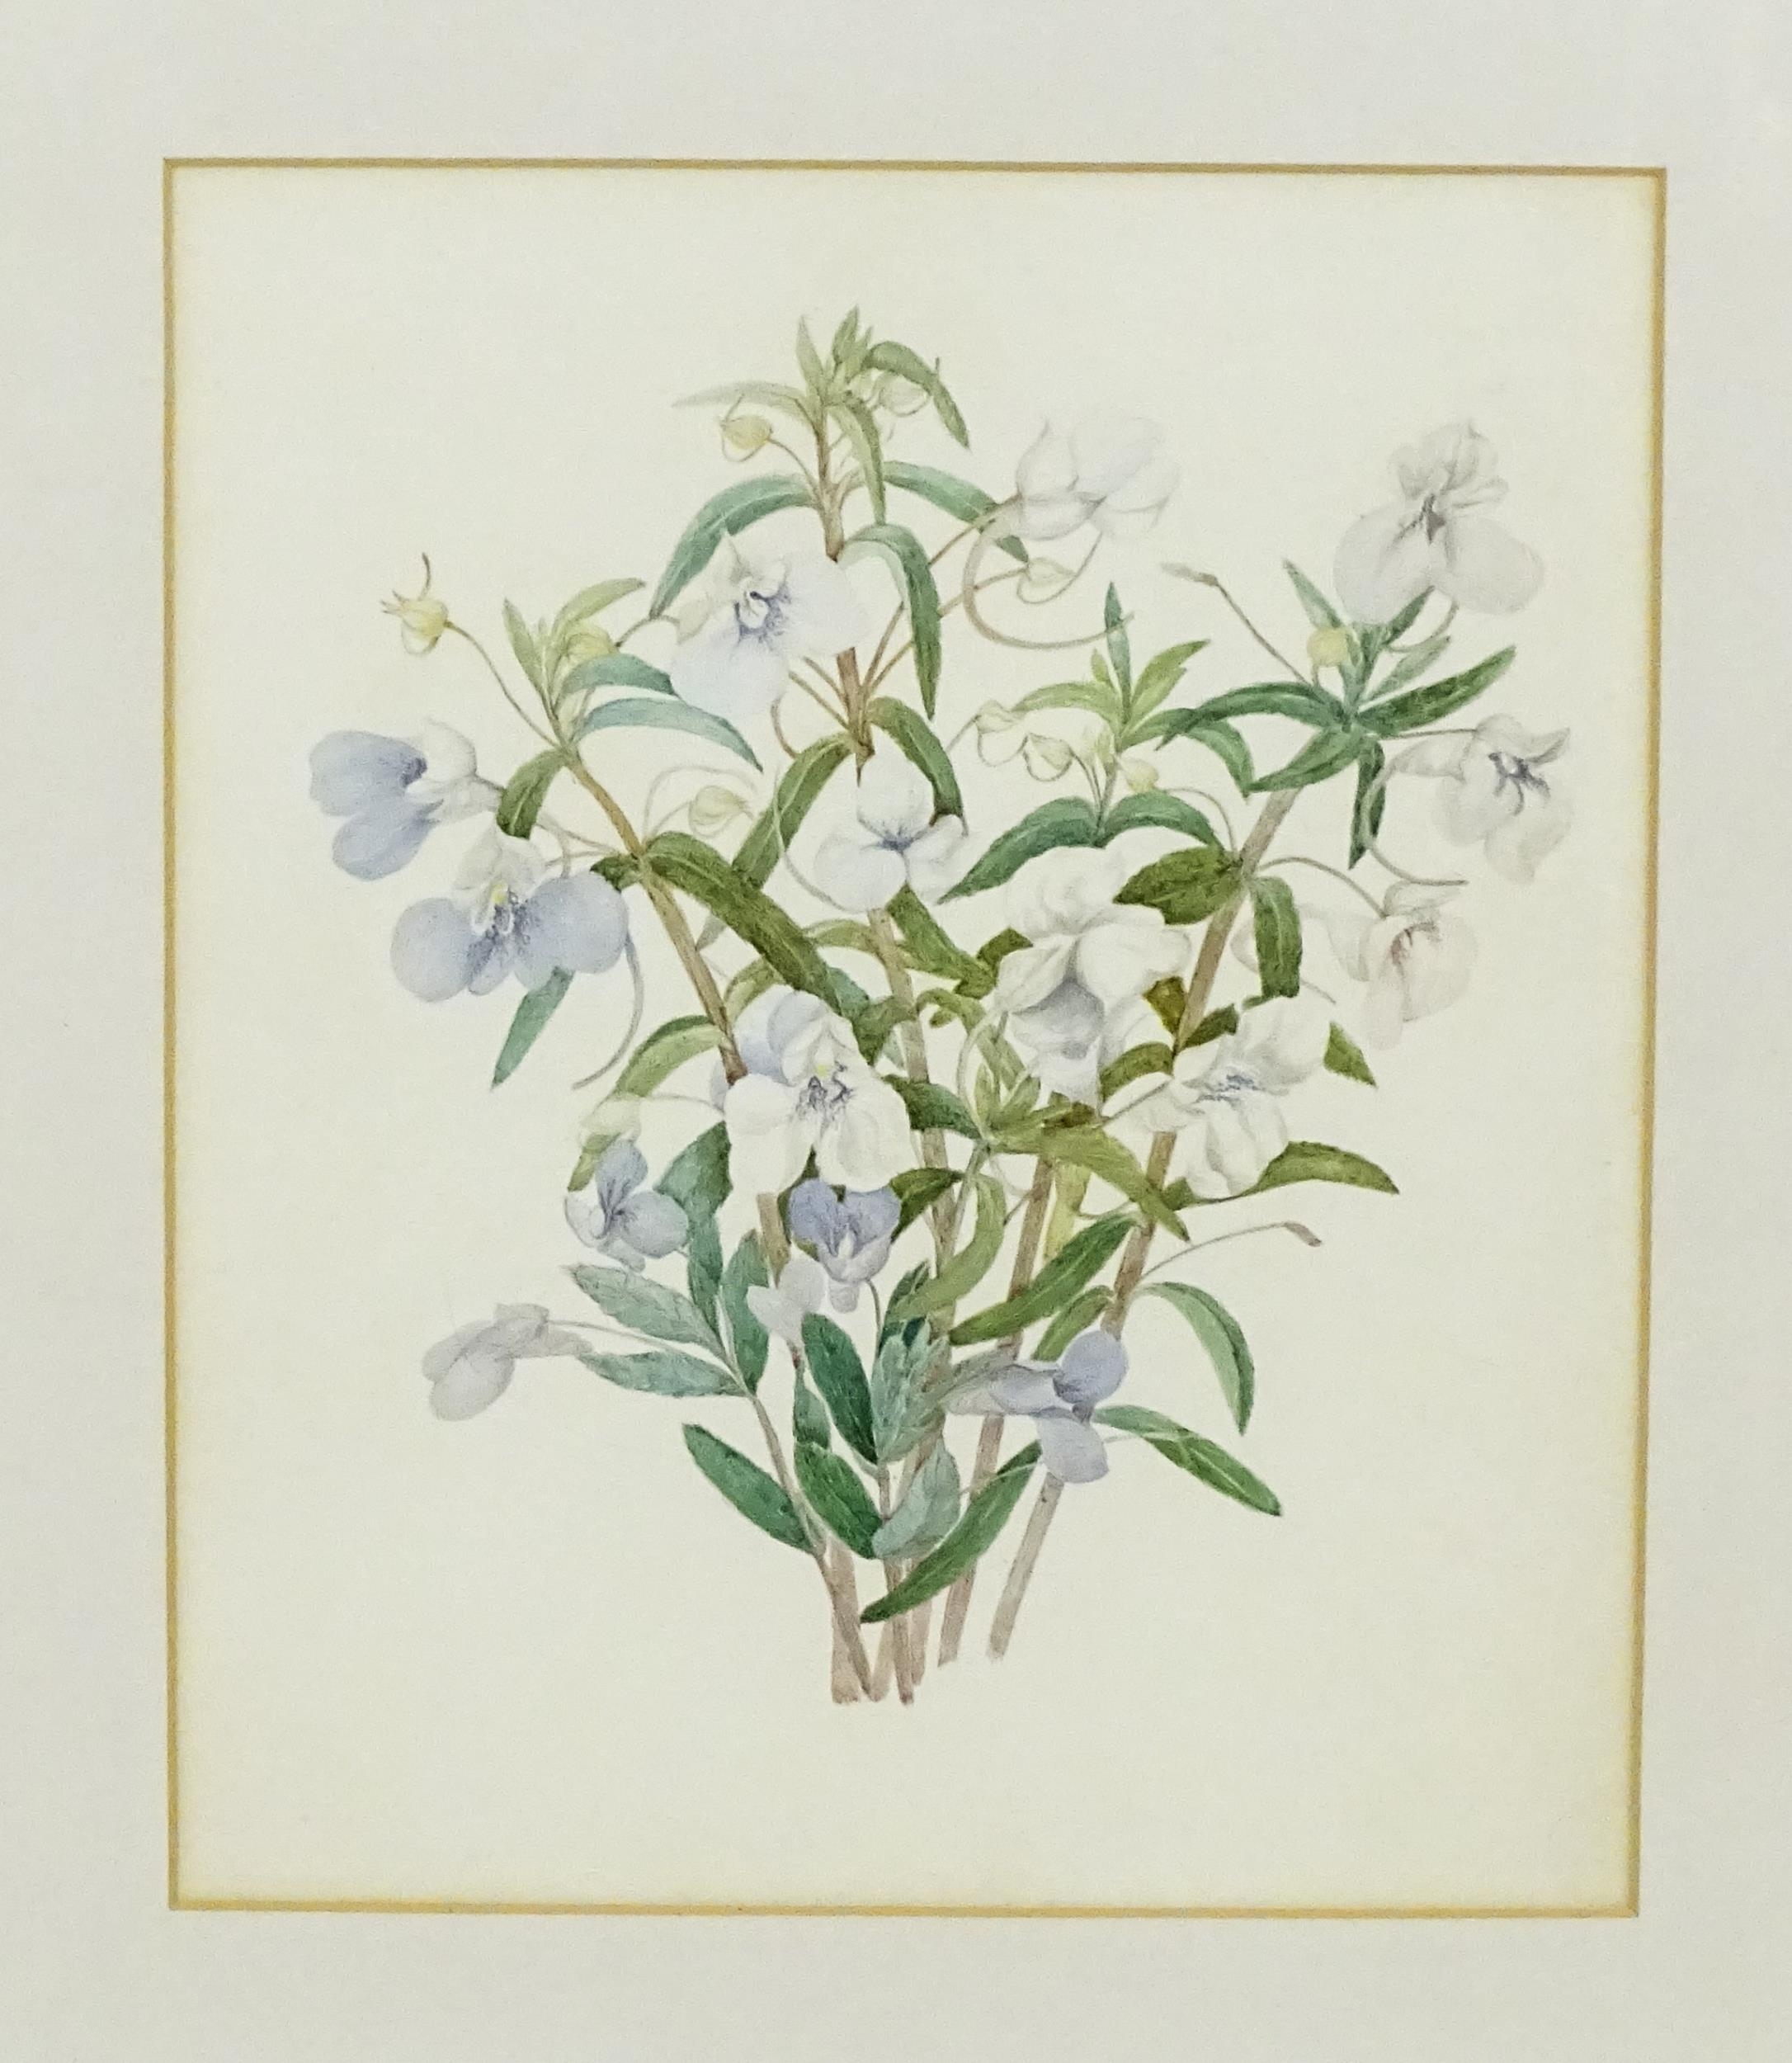 19th / 20th century, Watercolour, A botanical study of a bouquet of purple and white flowers. - Image 3 of 3